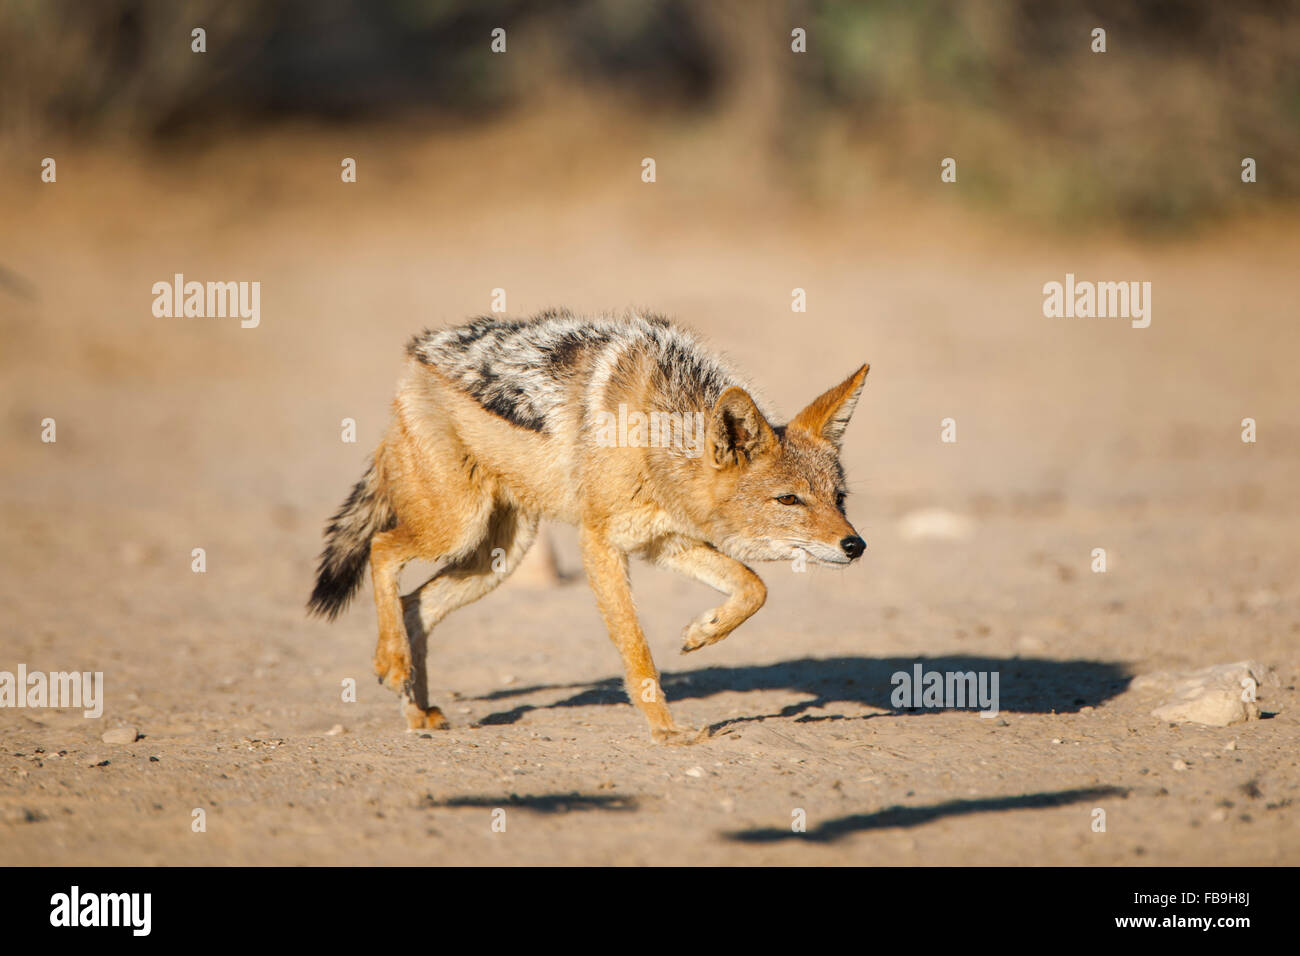 Black-backed jackal (Canis mesomelas) sneaking, Kgalagadi Transfrontier National Park, Northern Cape Province, South Africa Stock Photo